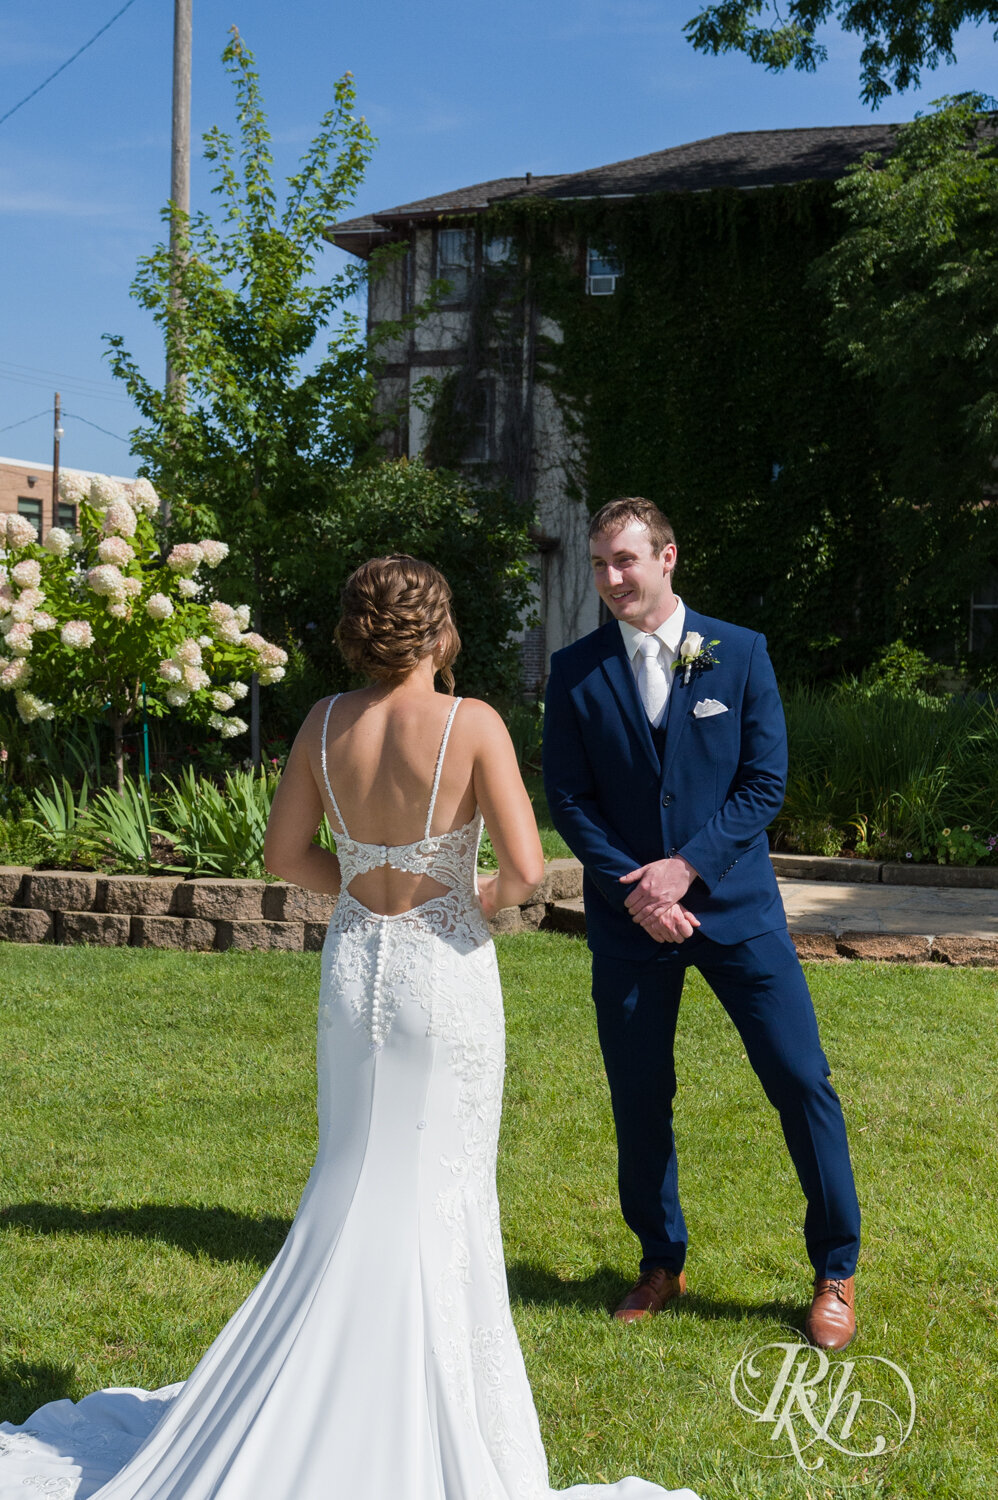 Bride and groom share first look on sunny day in Mankato, Minnesota.